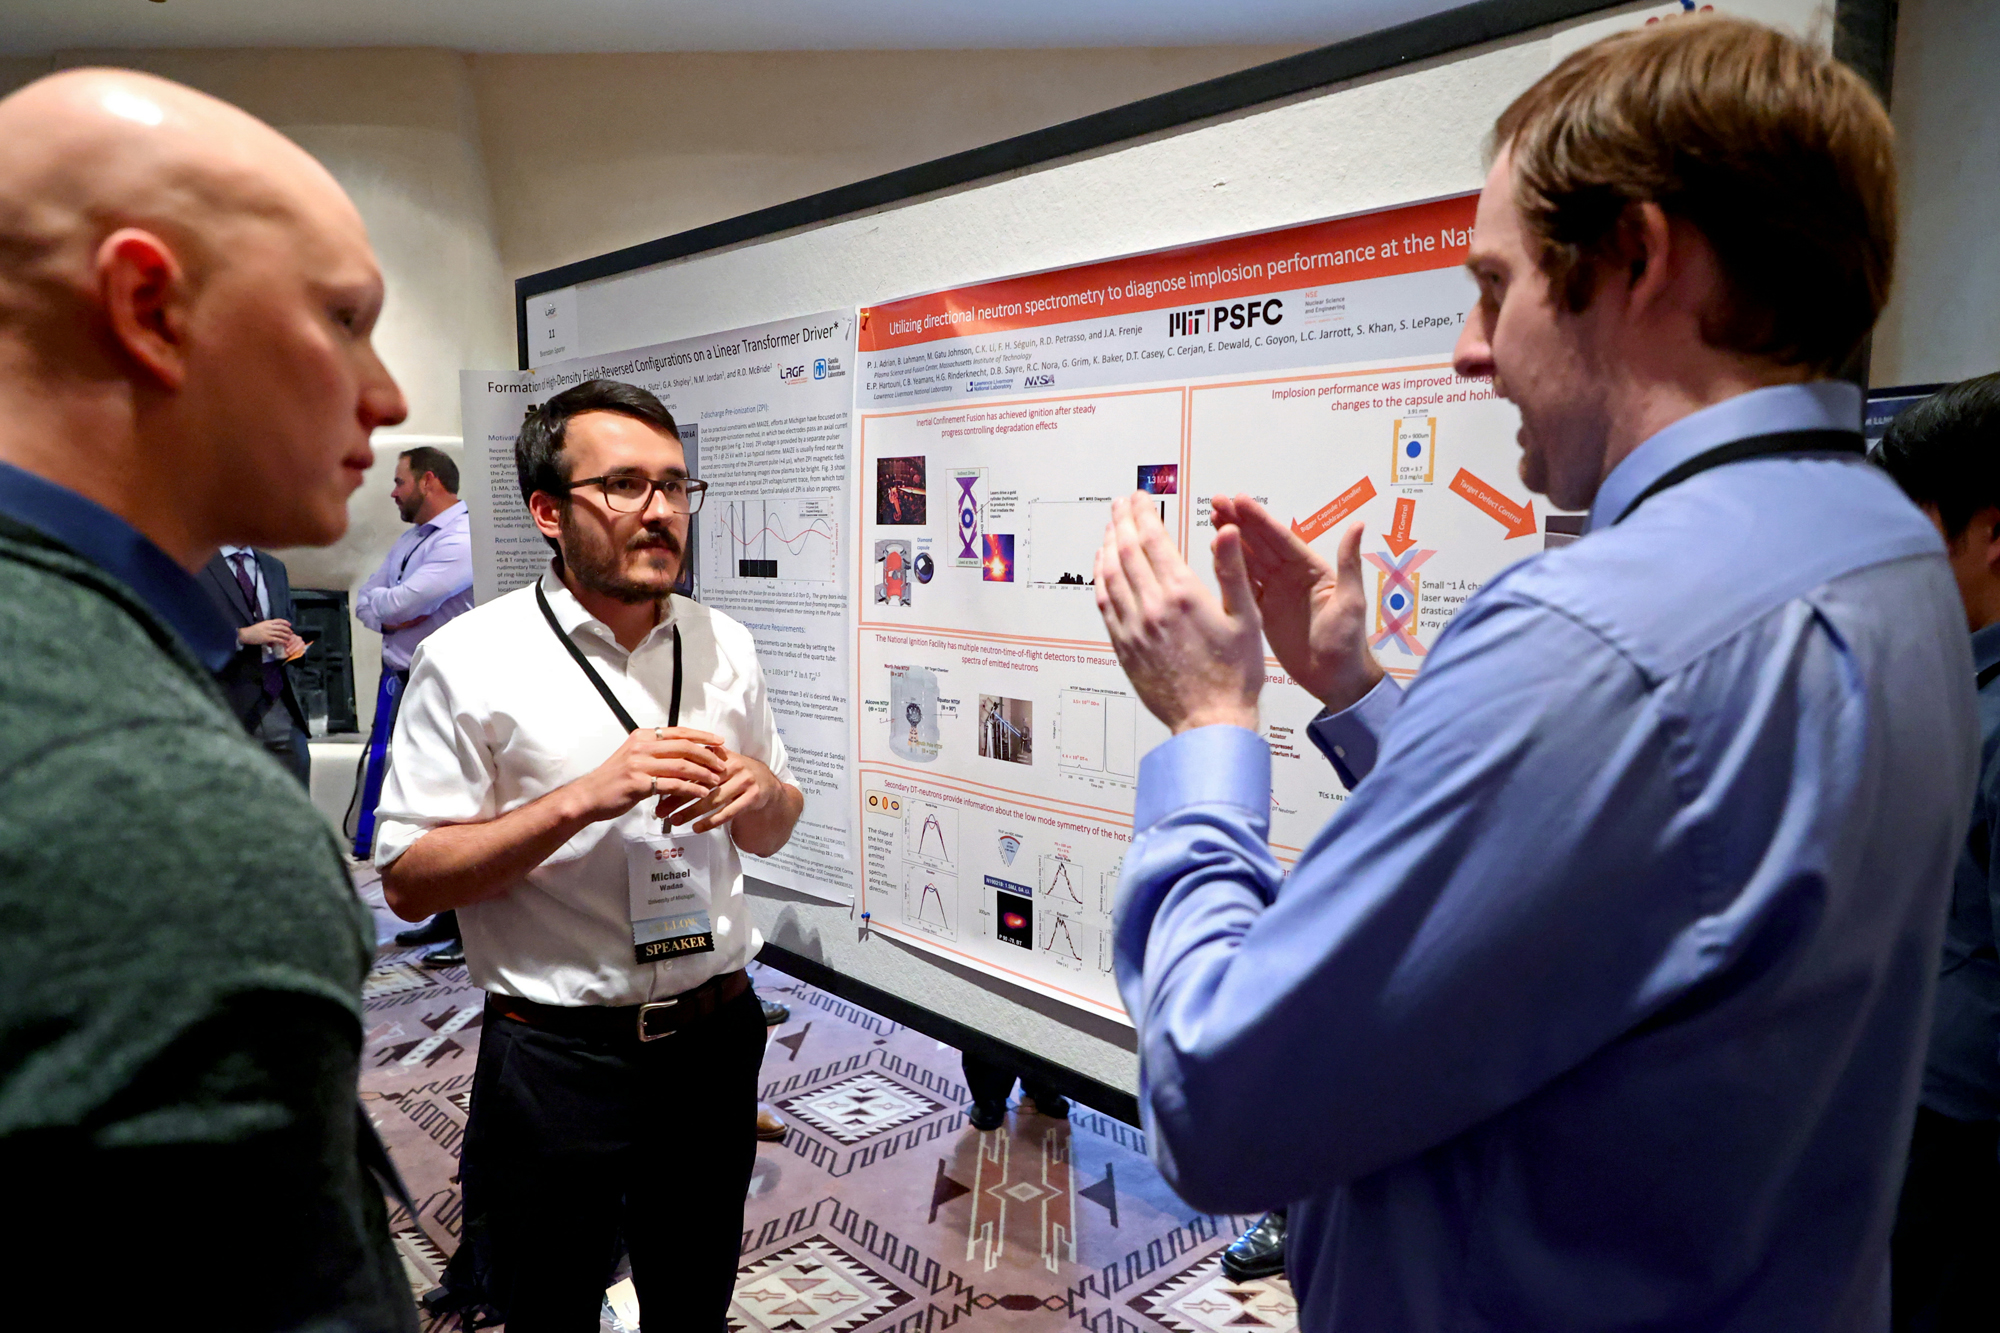 Fellows present their research at the annual poster session.